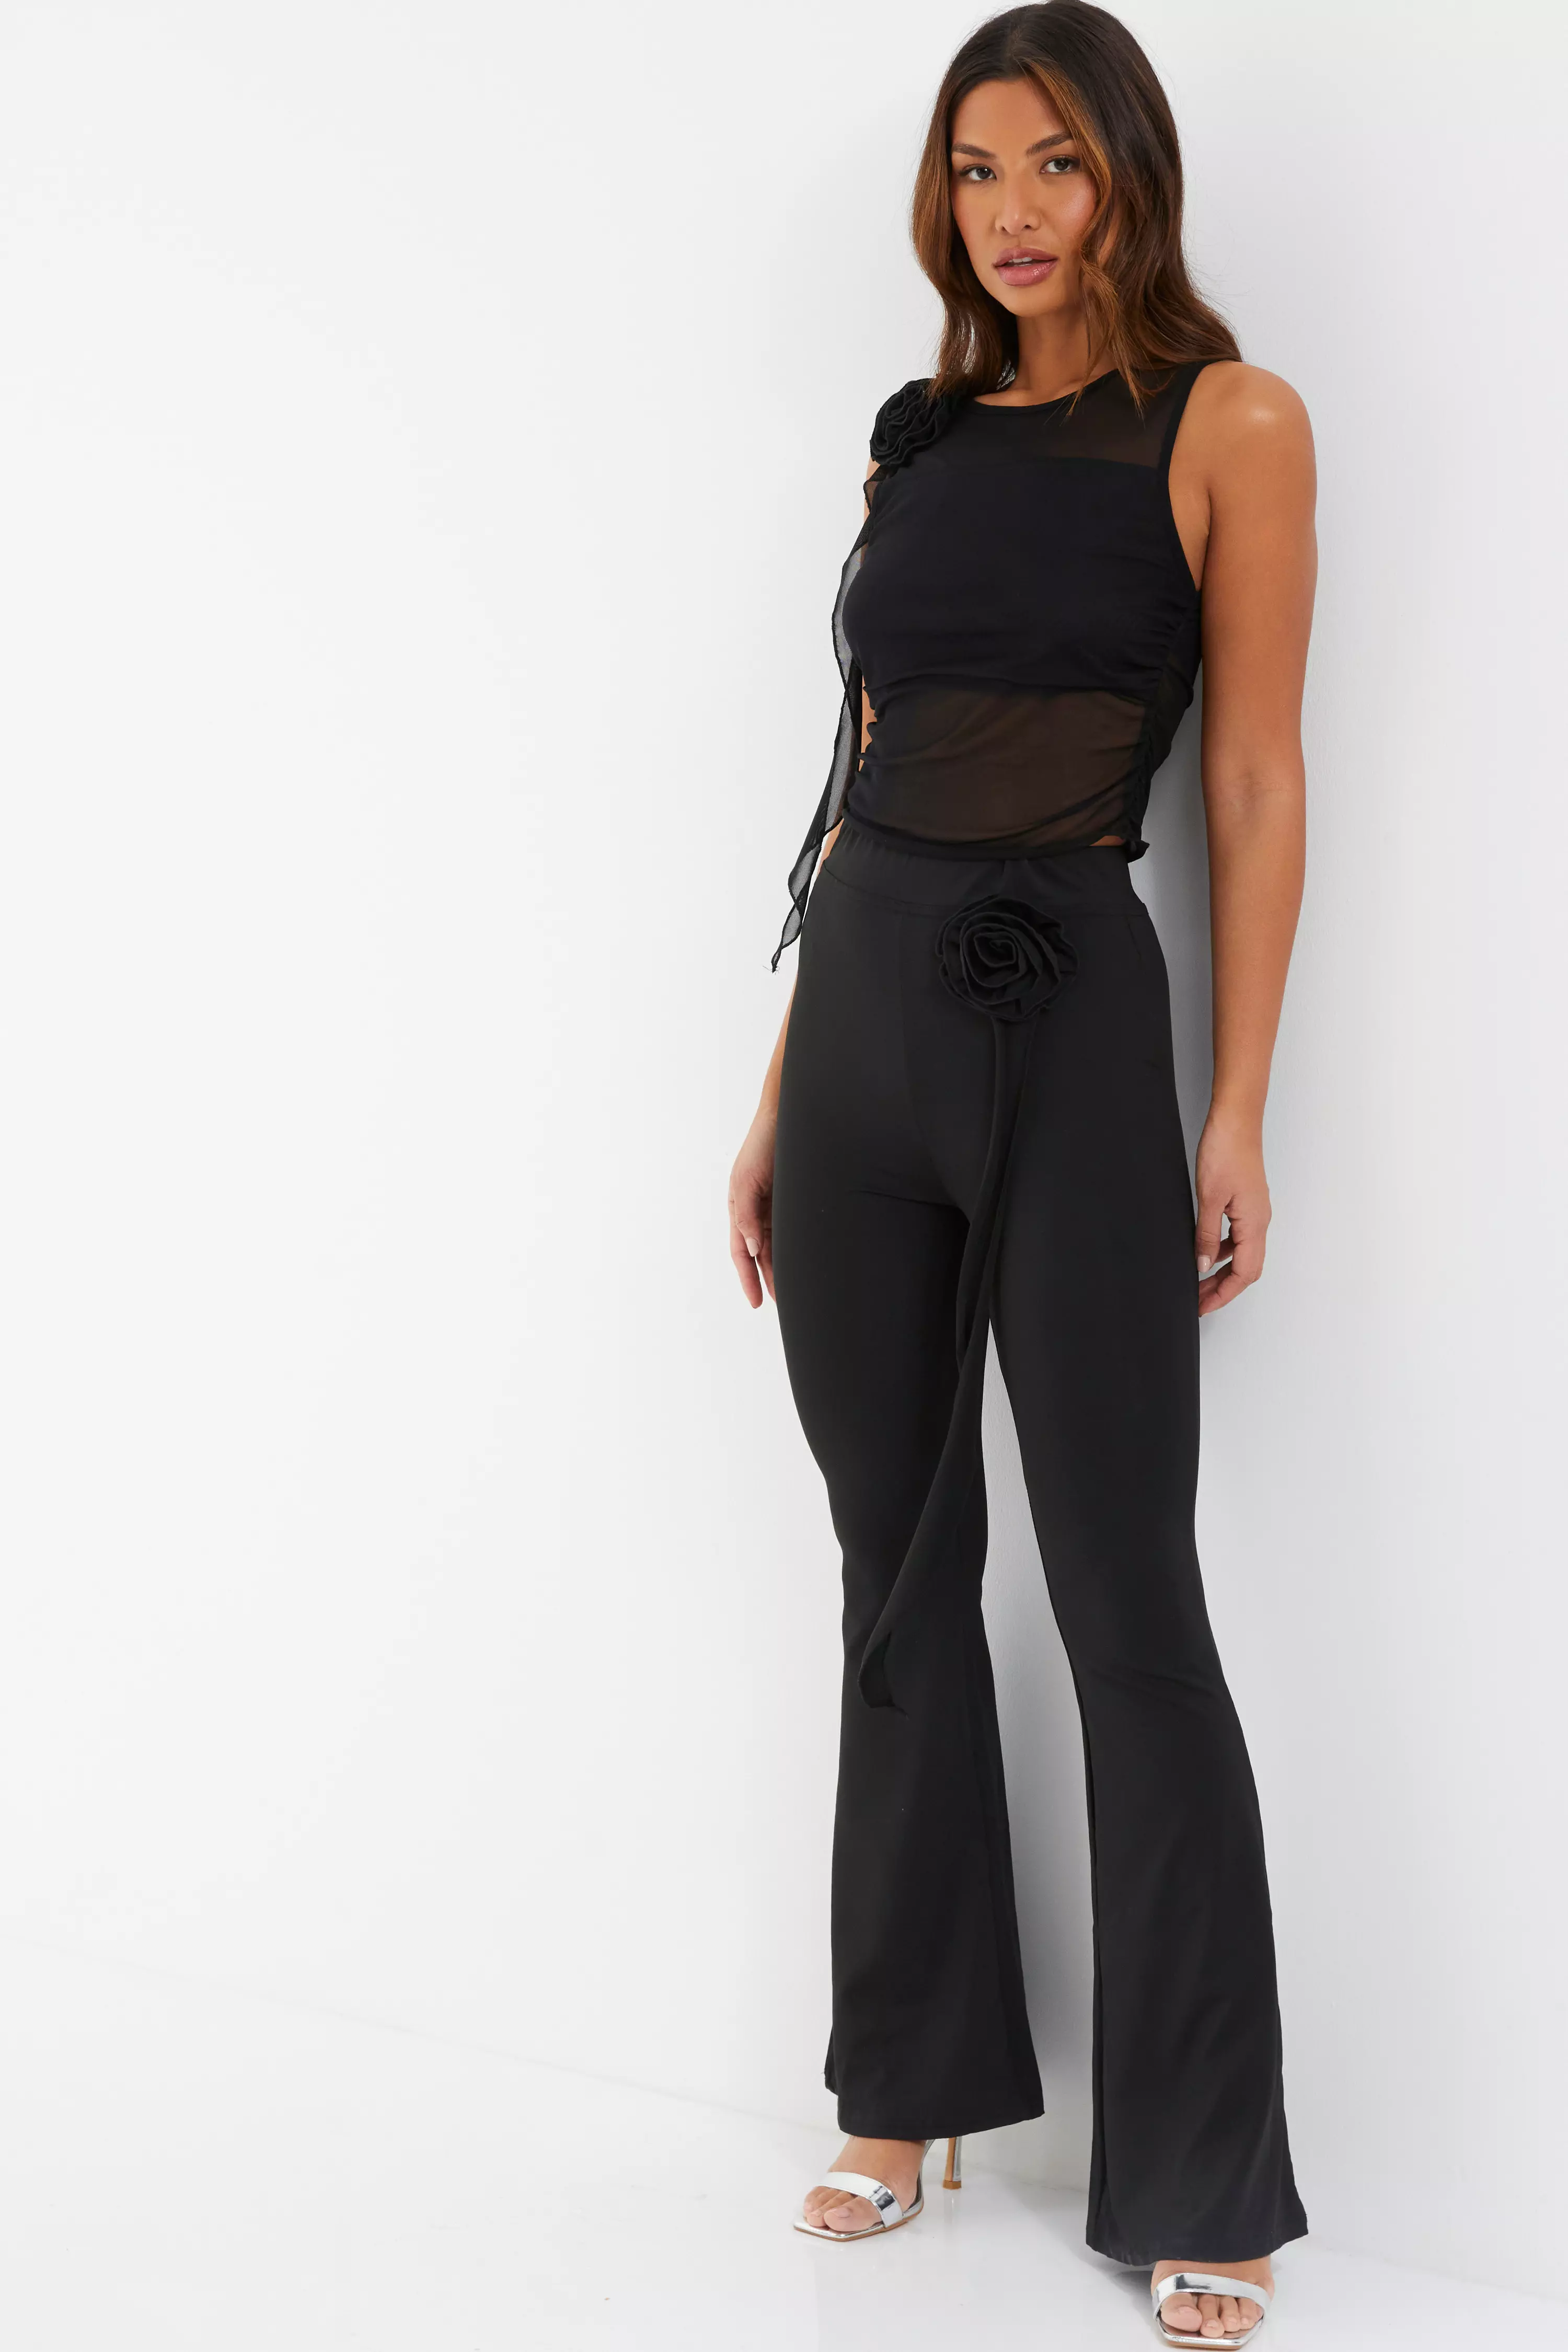 Black Mesh Ruched Corsage Top - QUIZ Clothing